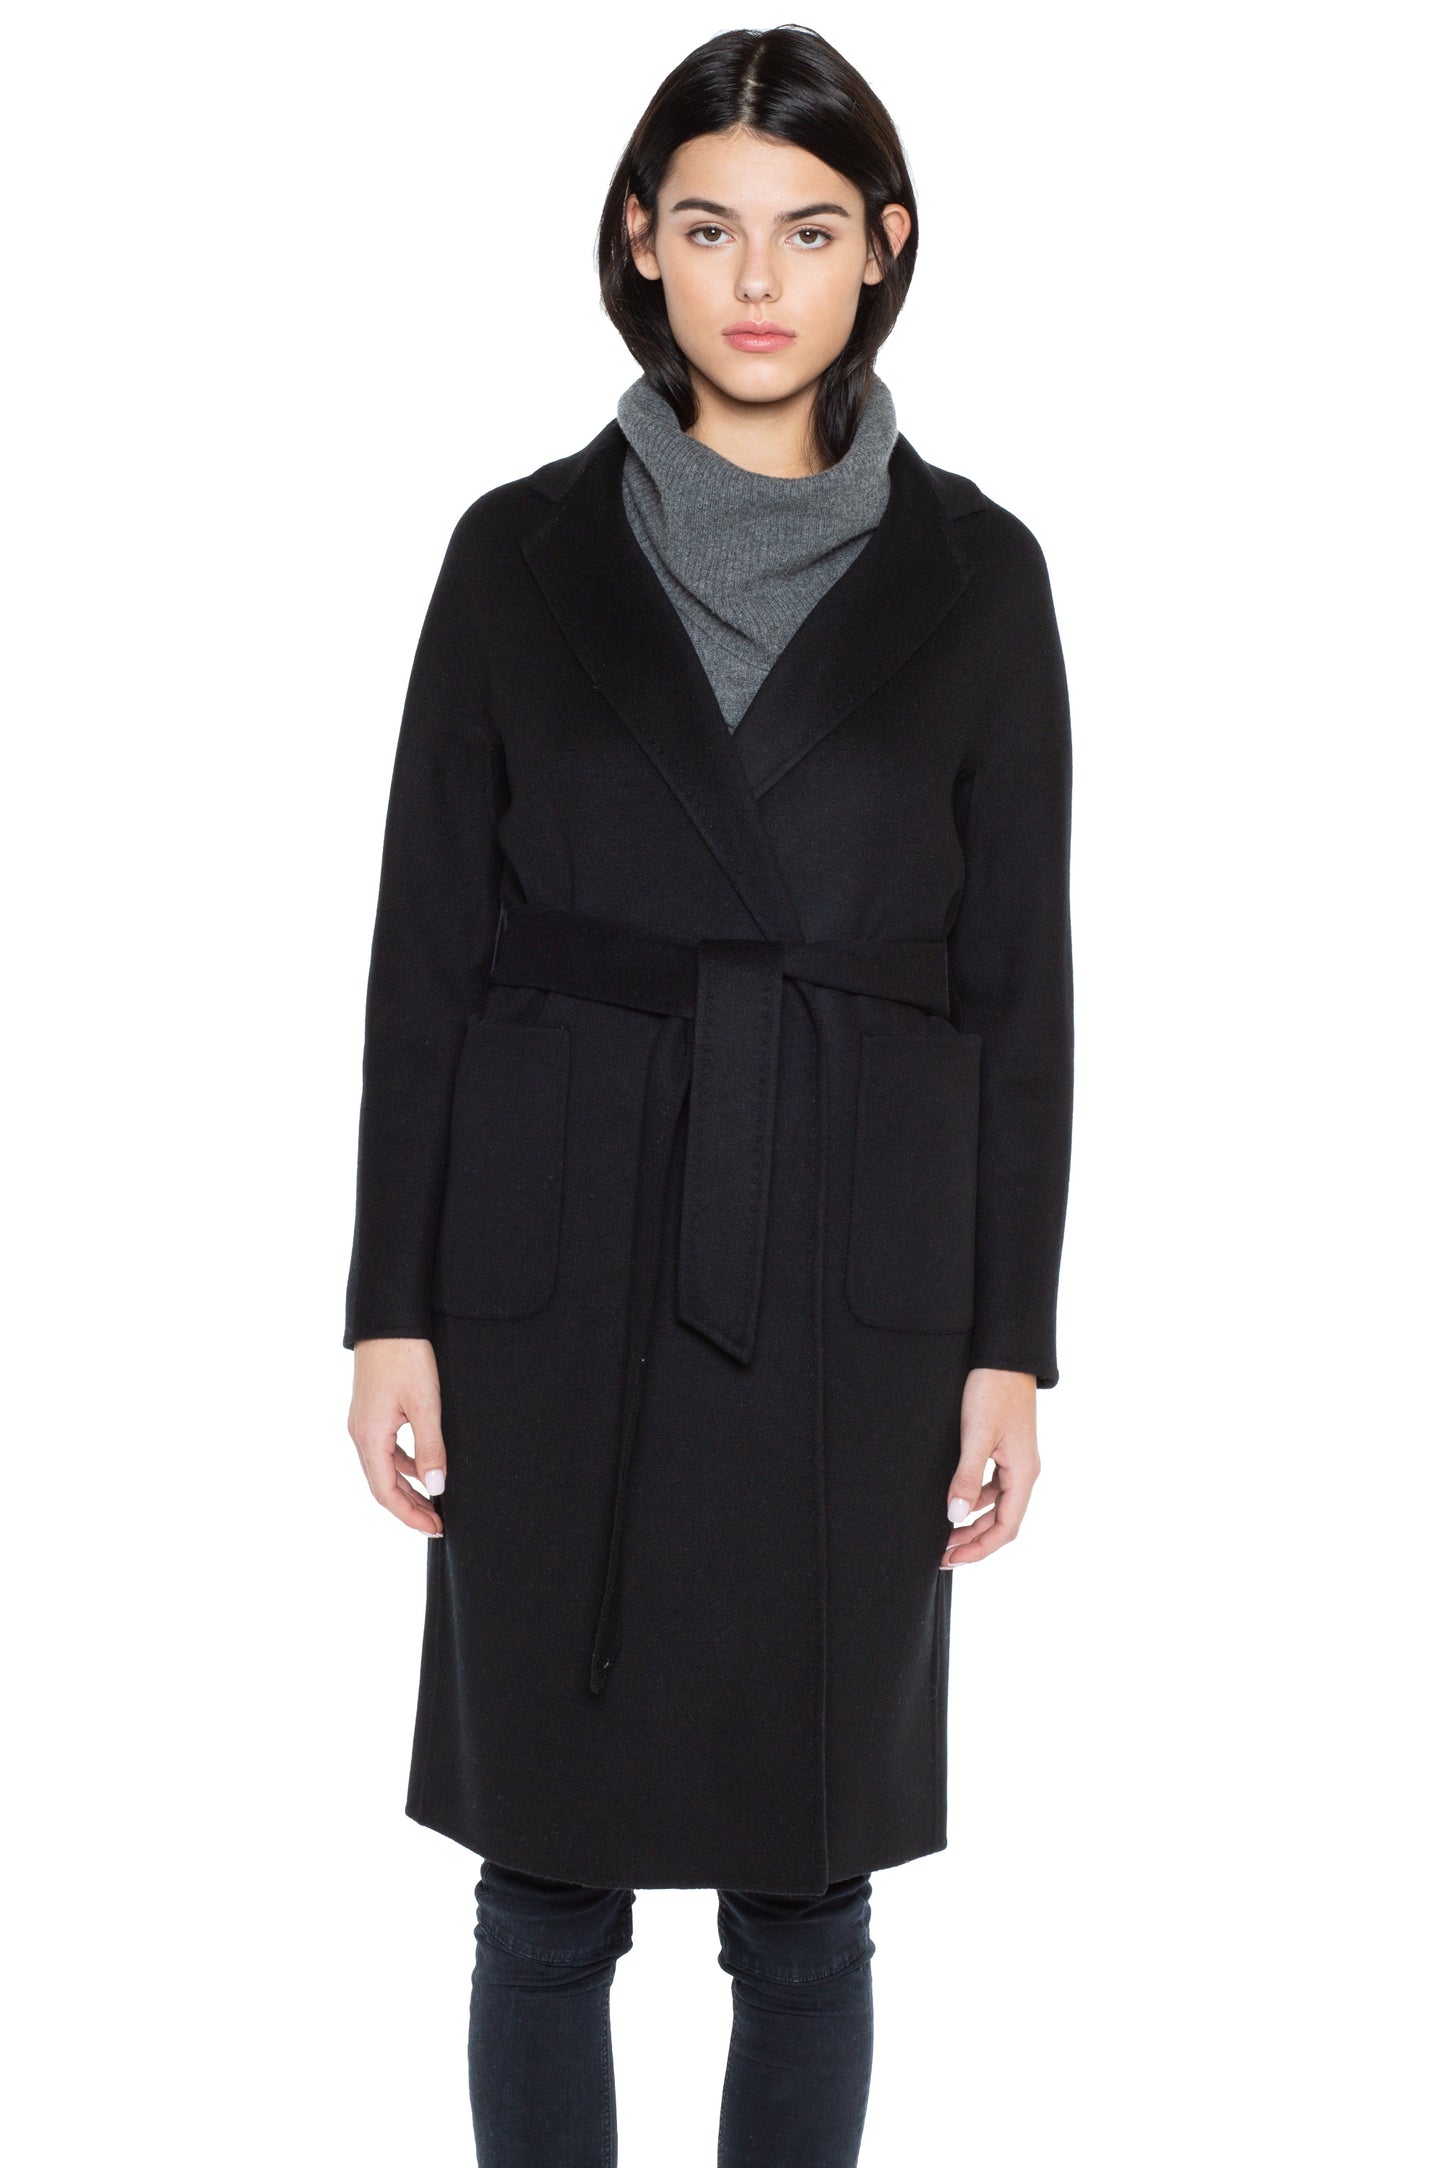 JENNIE LIU WOMEN'S CASHMERE WOOL DOUBLE FACE TRENCH COAT WITH BELT